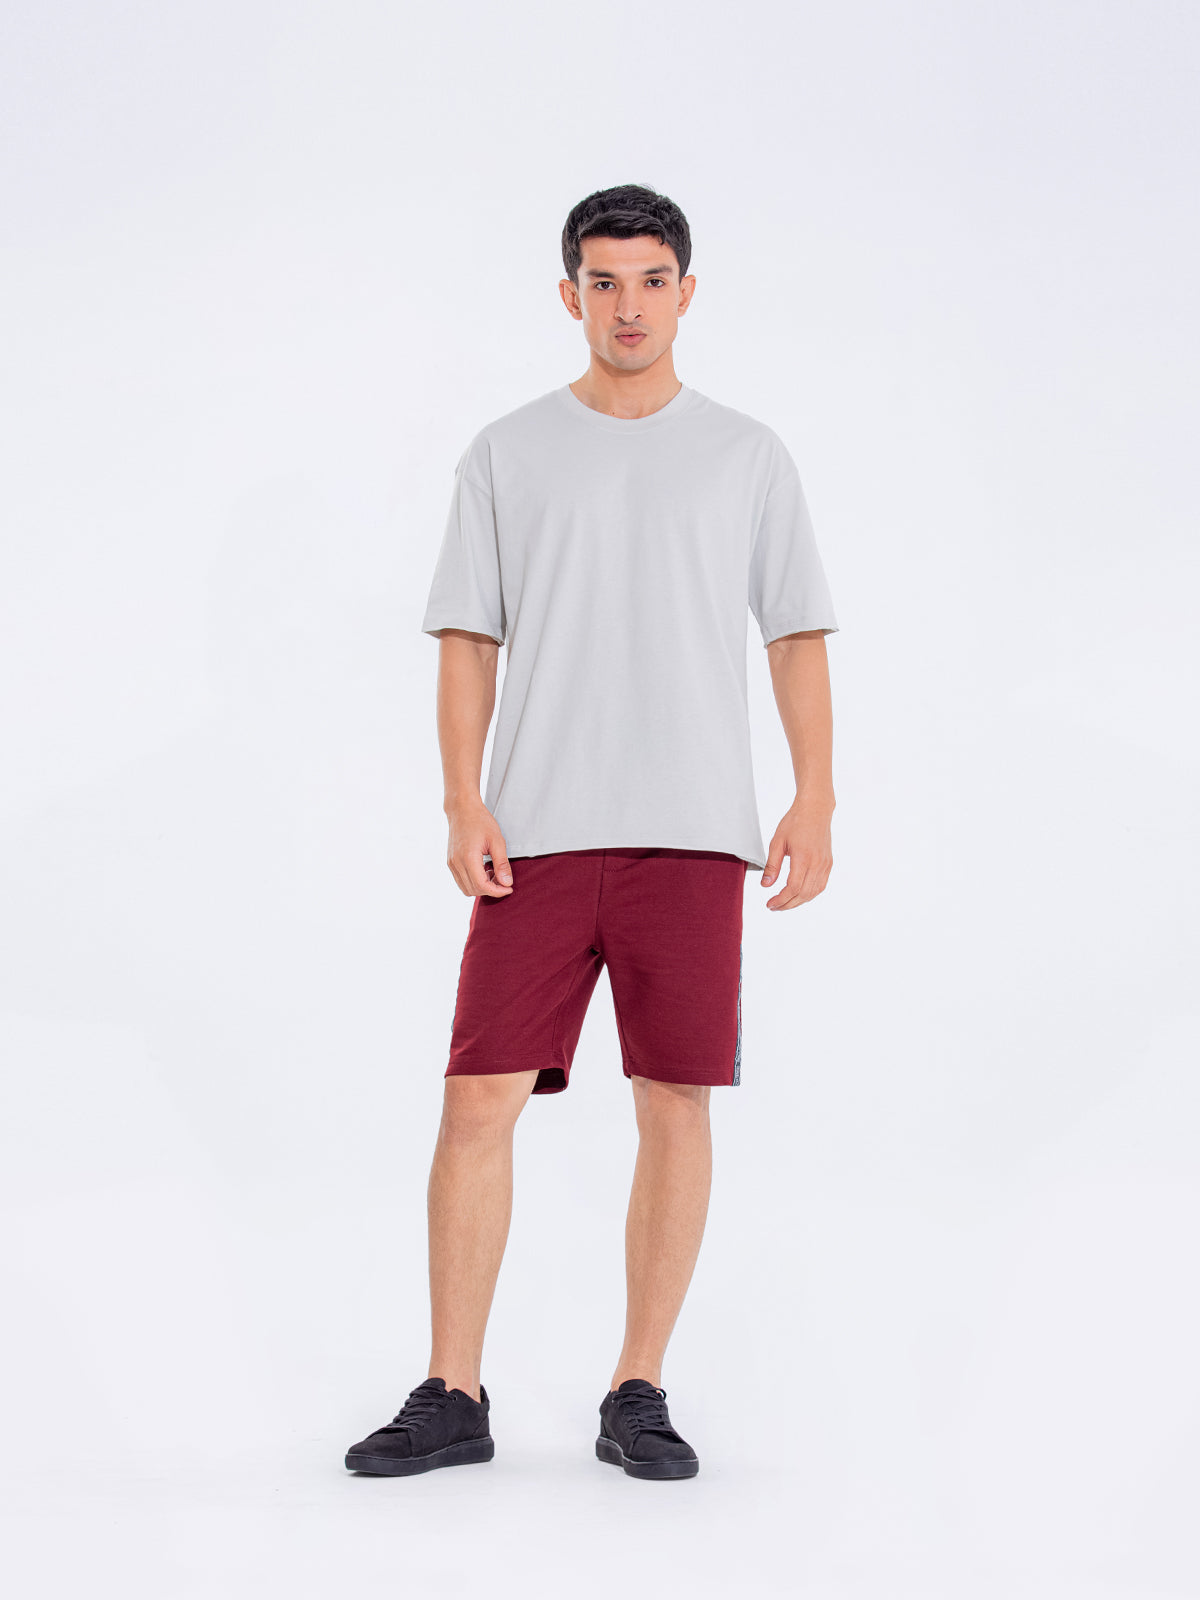 Relaxed Fit Basic Tee - FMTBL24-011